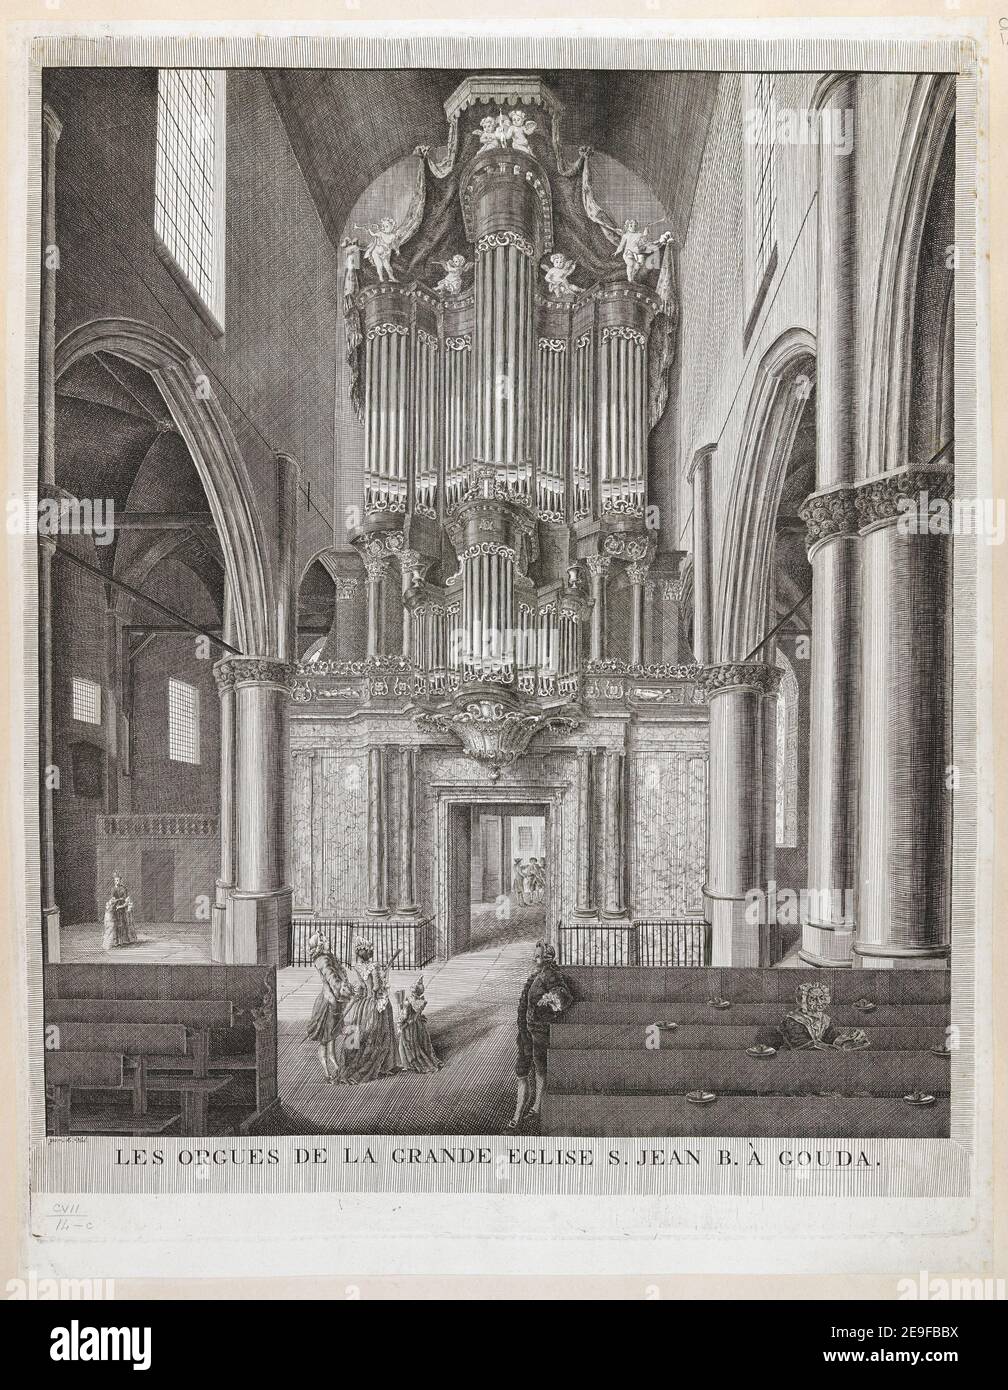 LES ORGUES DE LA GRANDE EGLISE S. JEAN B. AÃÄ GOUDA.  Author  Val, M. 107.14.c. Place of publication: [Gouda?] Publisher: [publisher not identified] Date of publication: [between 1750 and 1770]  Item type: 1 print Medium: etching and engraving Dimensions: platemark 51.5 x 40.9 cm, on sheet 54.1 x 42.3 cm  Former owner: George III, King of Great Britain, 1738-1820 Stock Photo